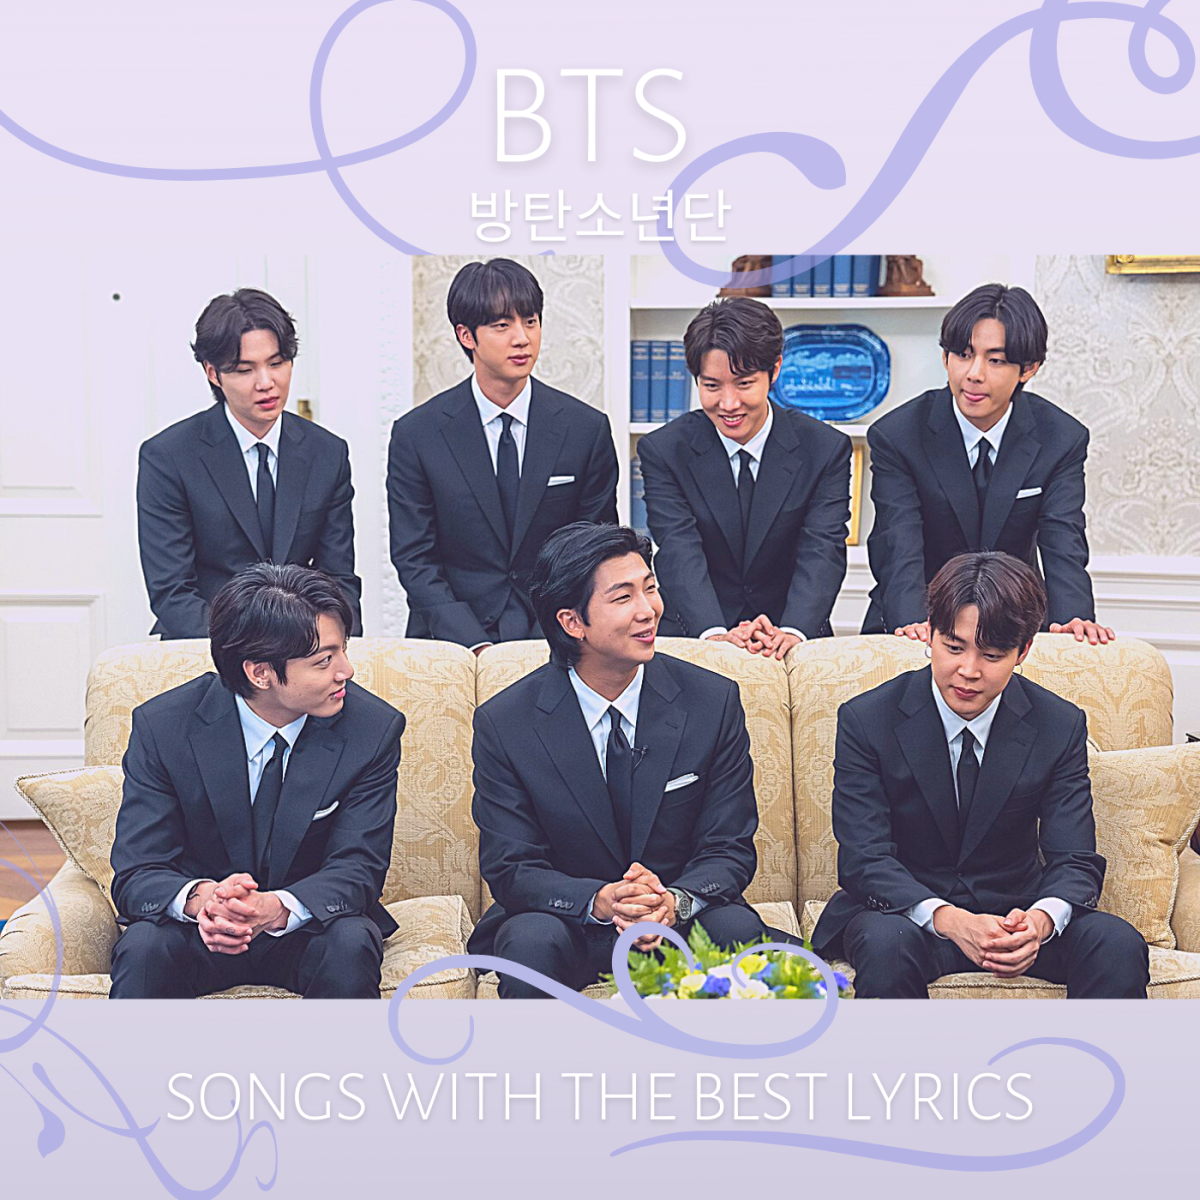 Top 10 BTS Songs With the Best Lyrics